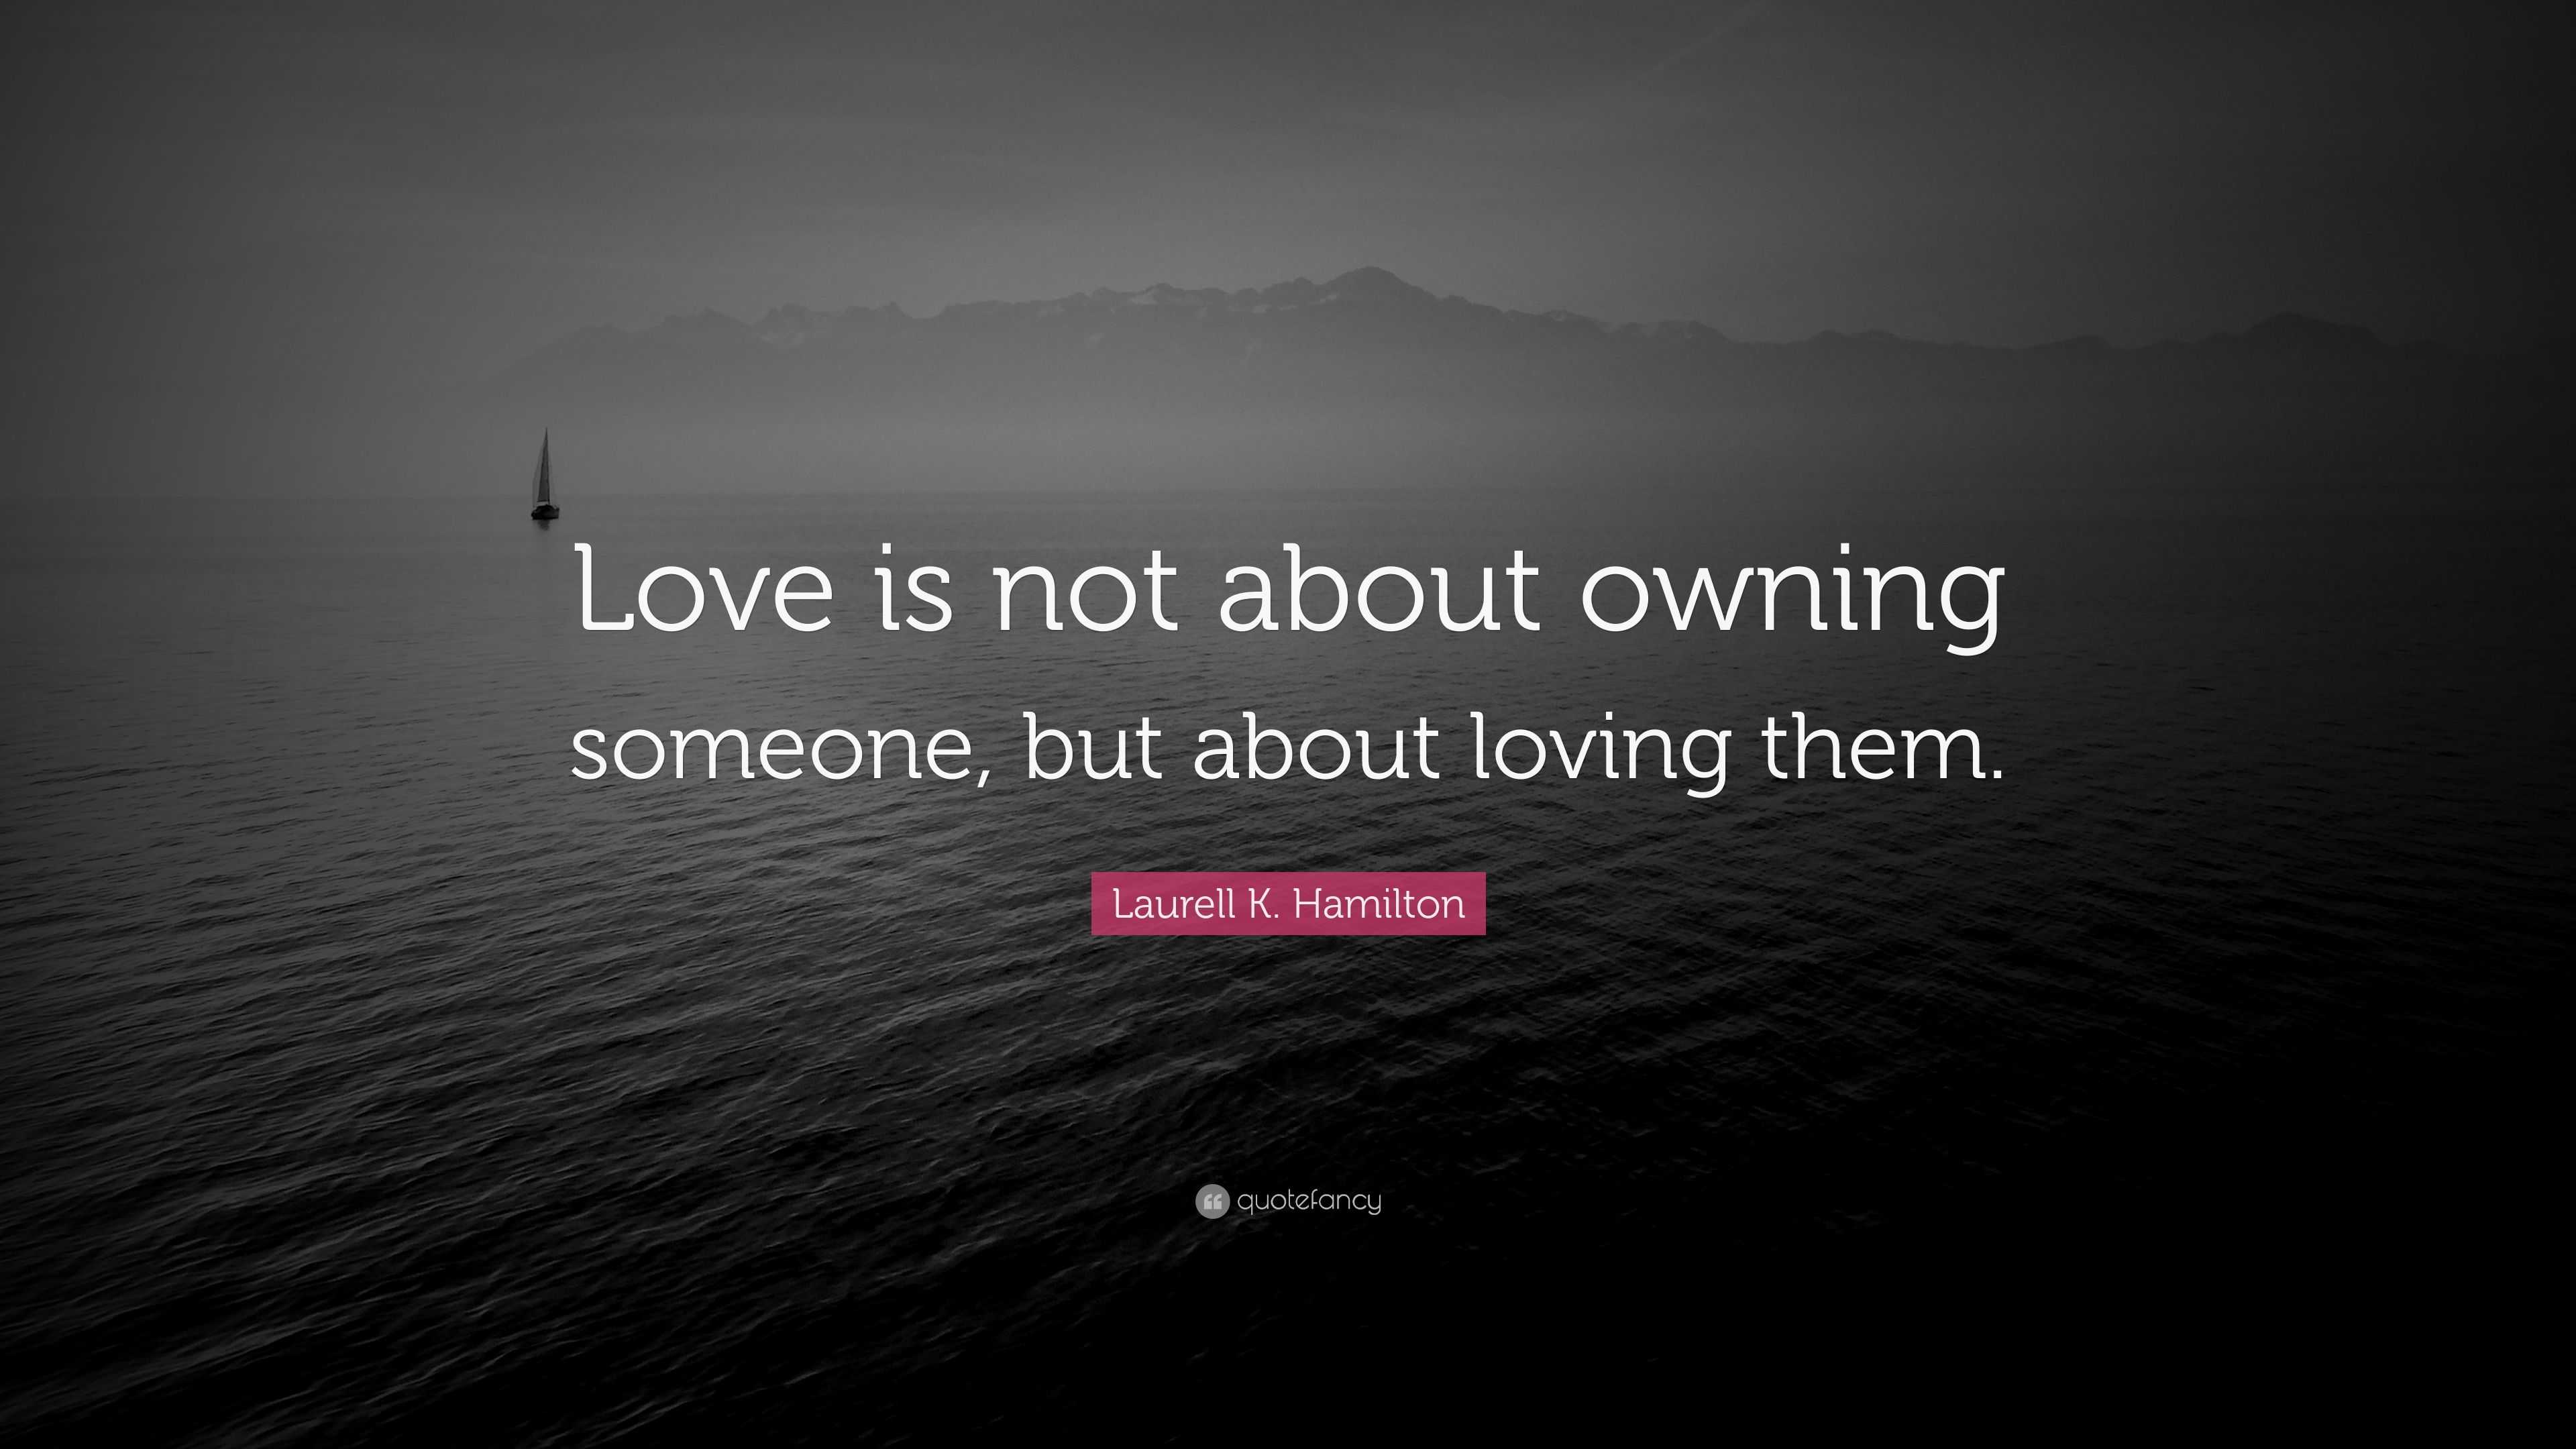 Laurell K Hamilton Quote “Love is not about owning someone but about